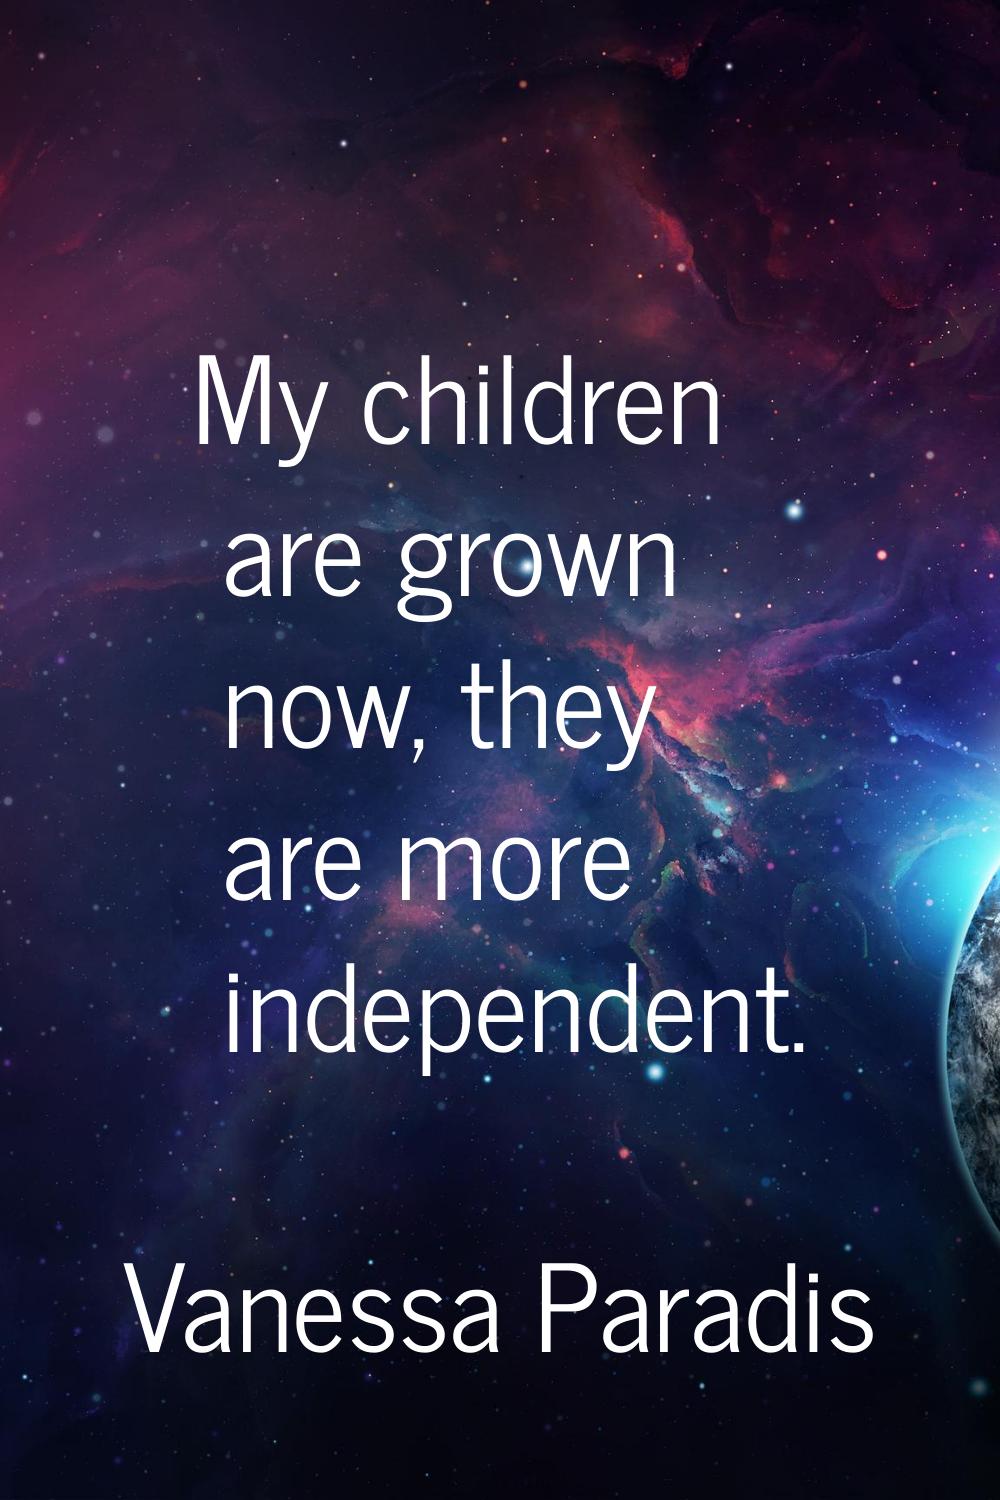 My children are grown now, they are more independent.